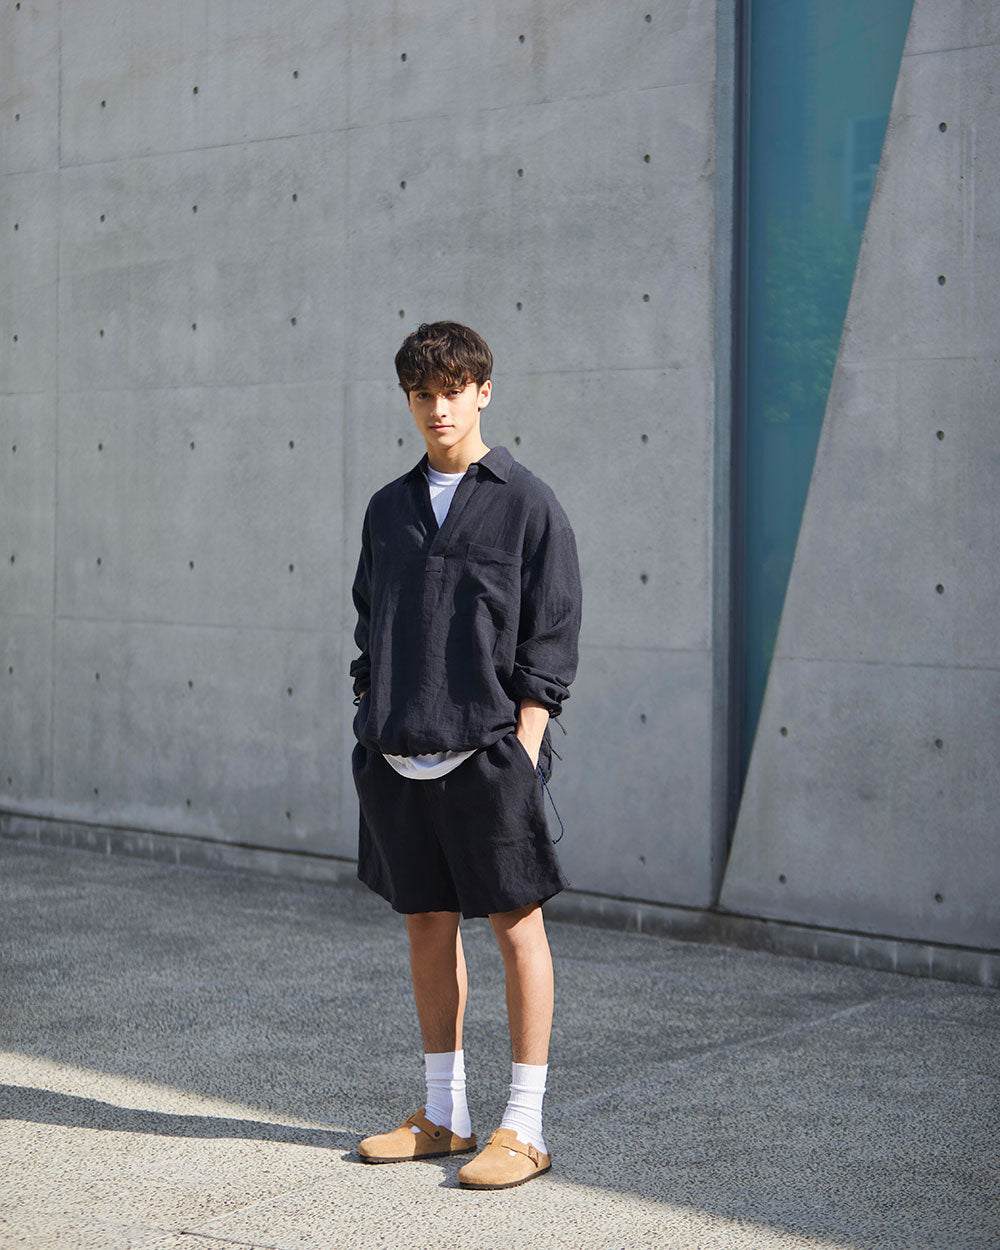 PULL OVER SHIRTS [WR2-SH001] Navy